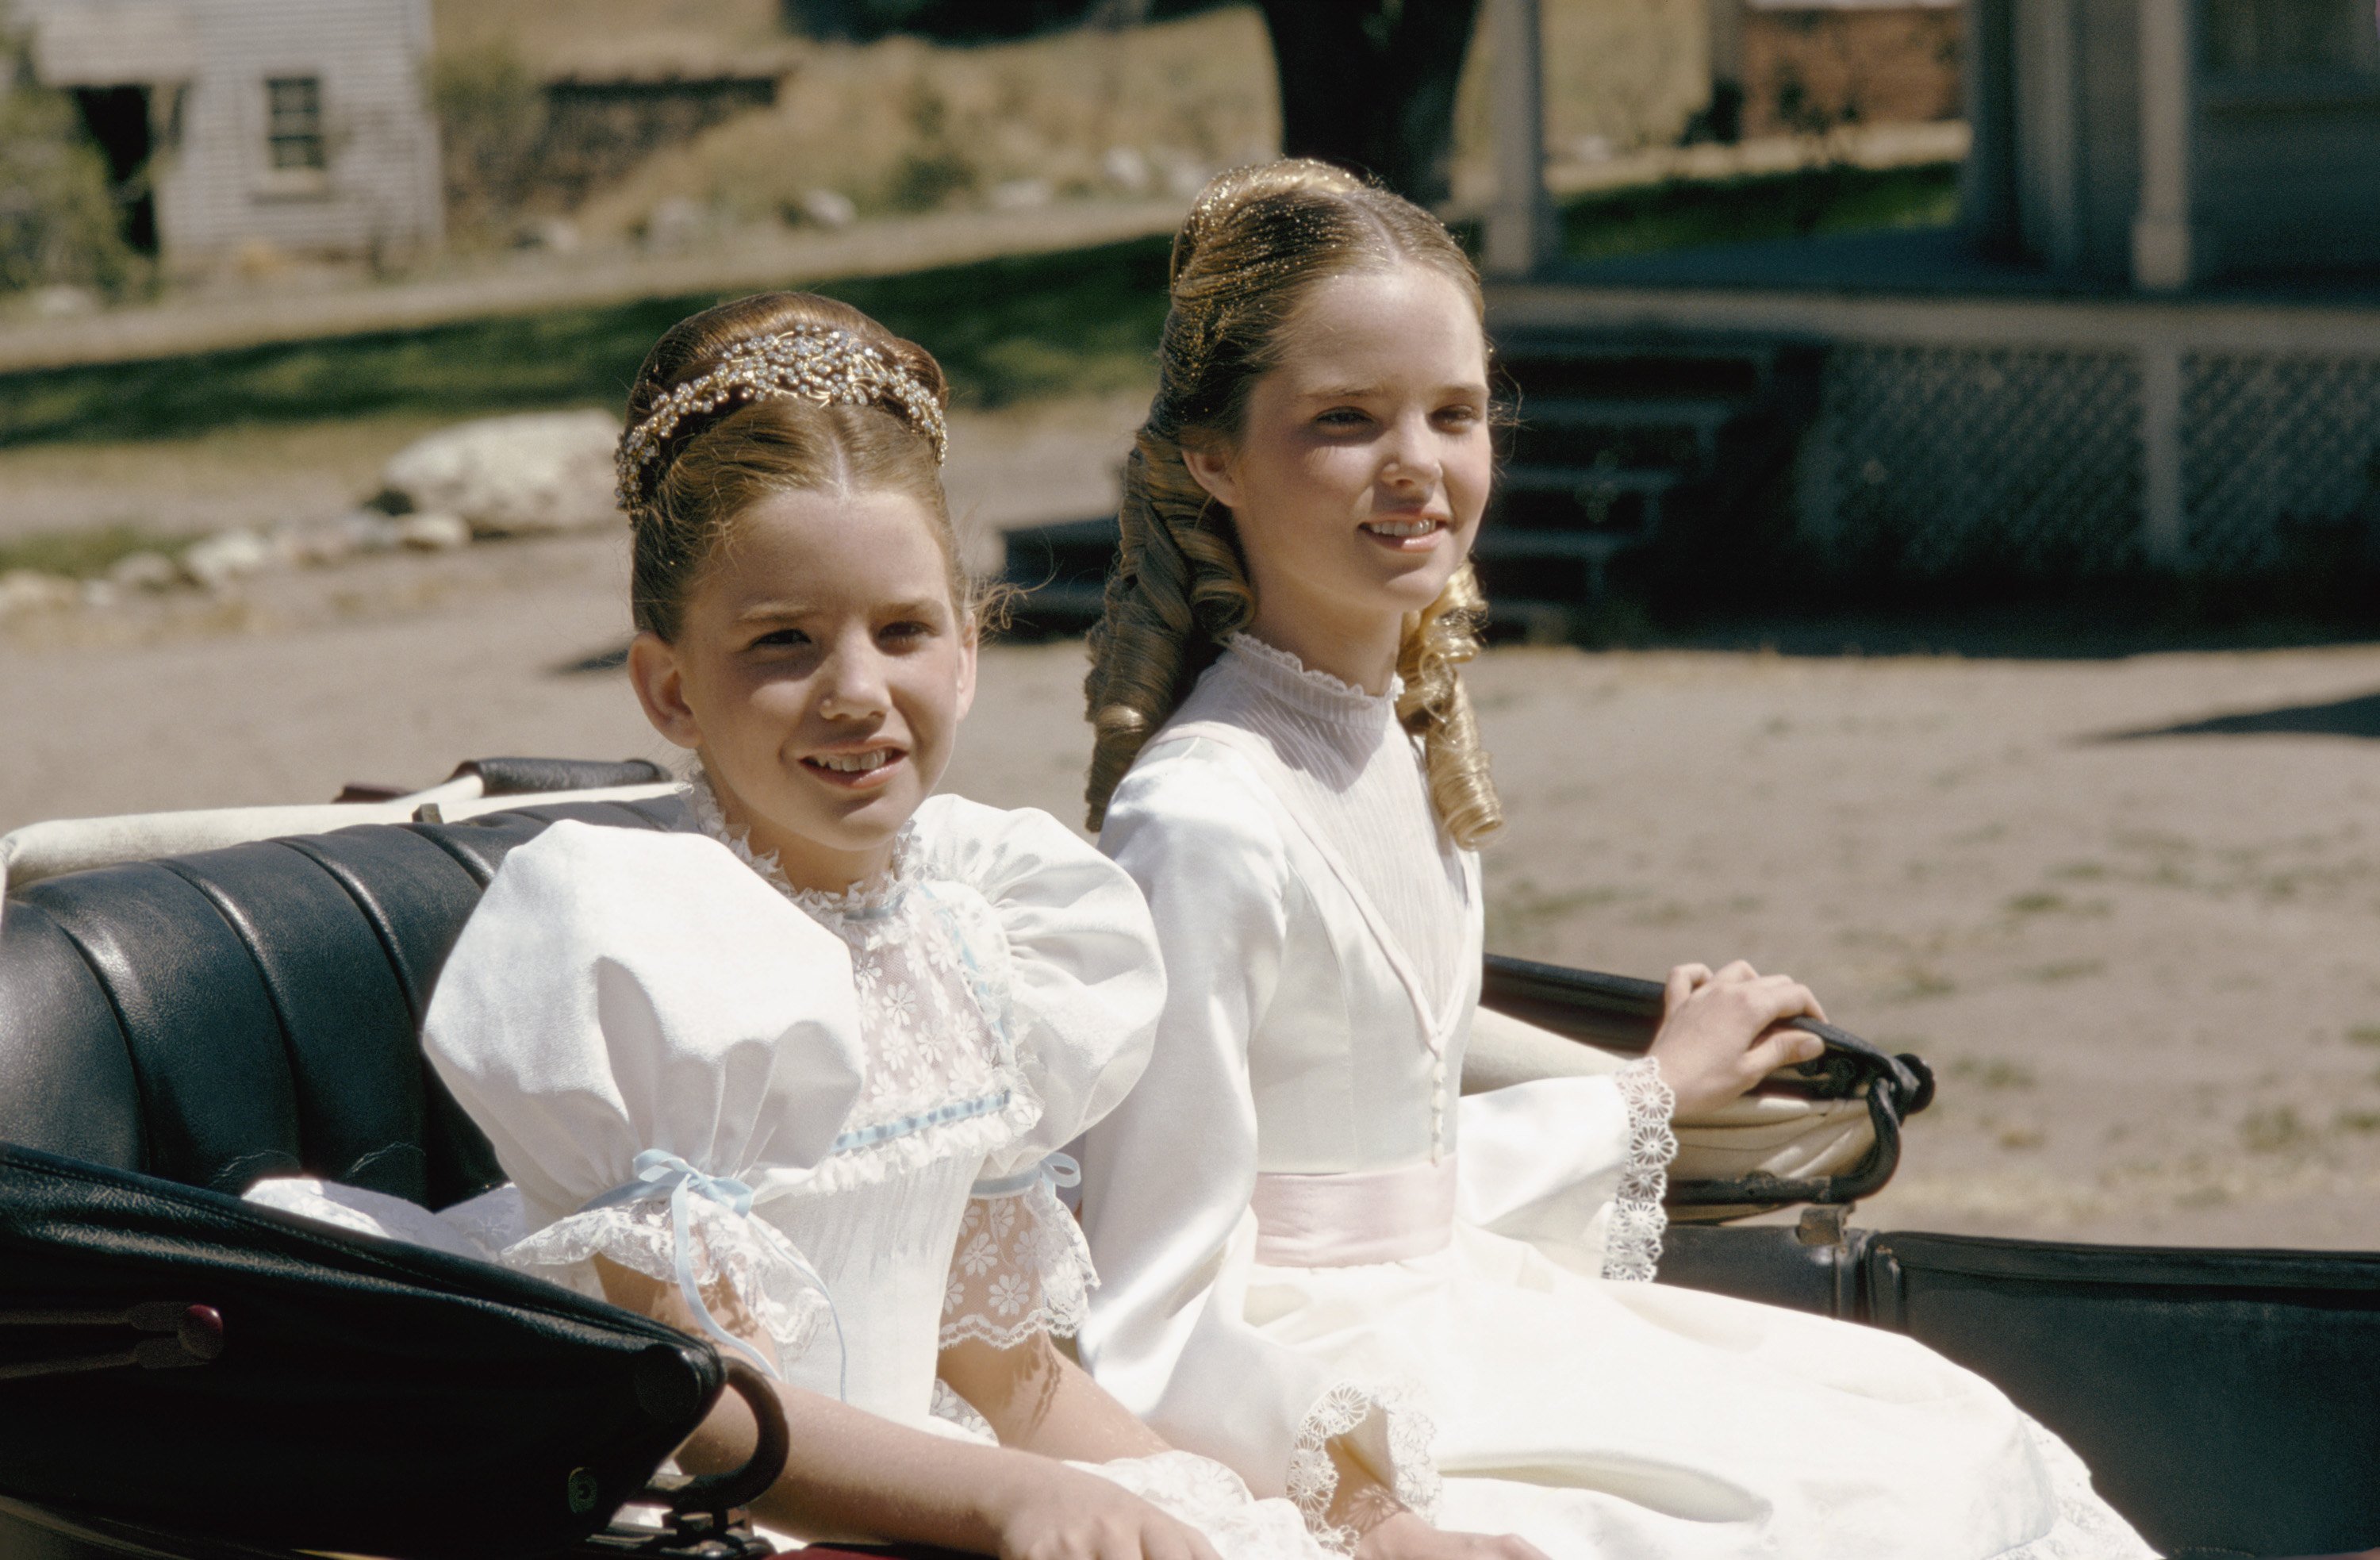 Melissa Gilbert and Melissa Sue Anderson sit in a carriage on the set of 'Little House on the Prairie.' They are in white dresses.